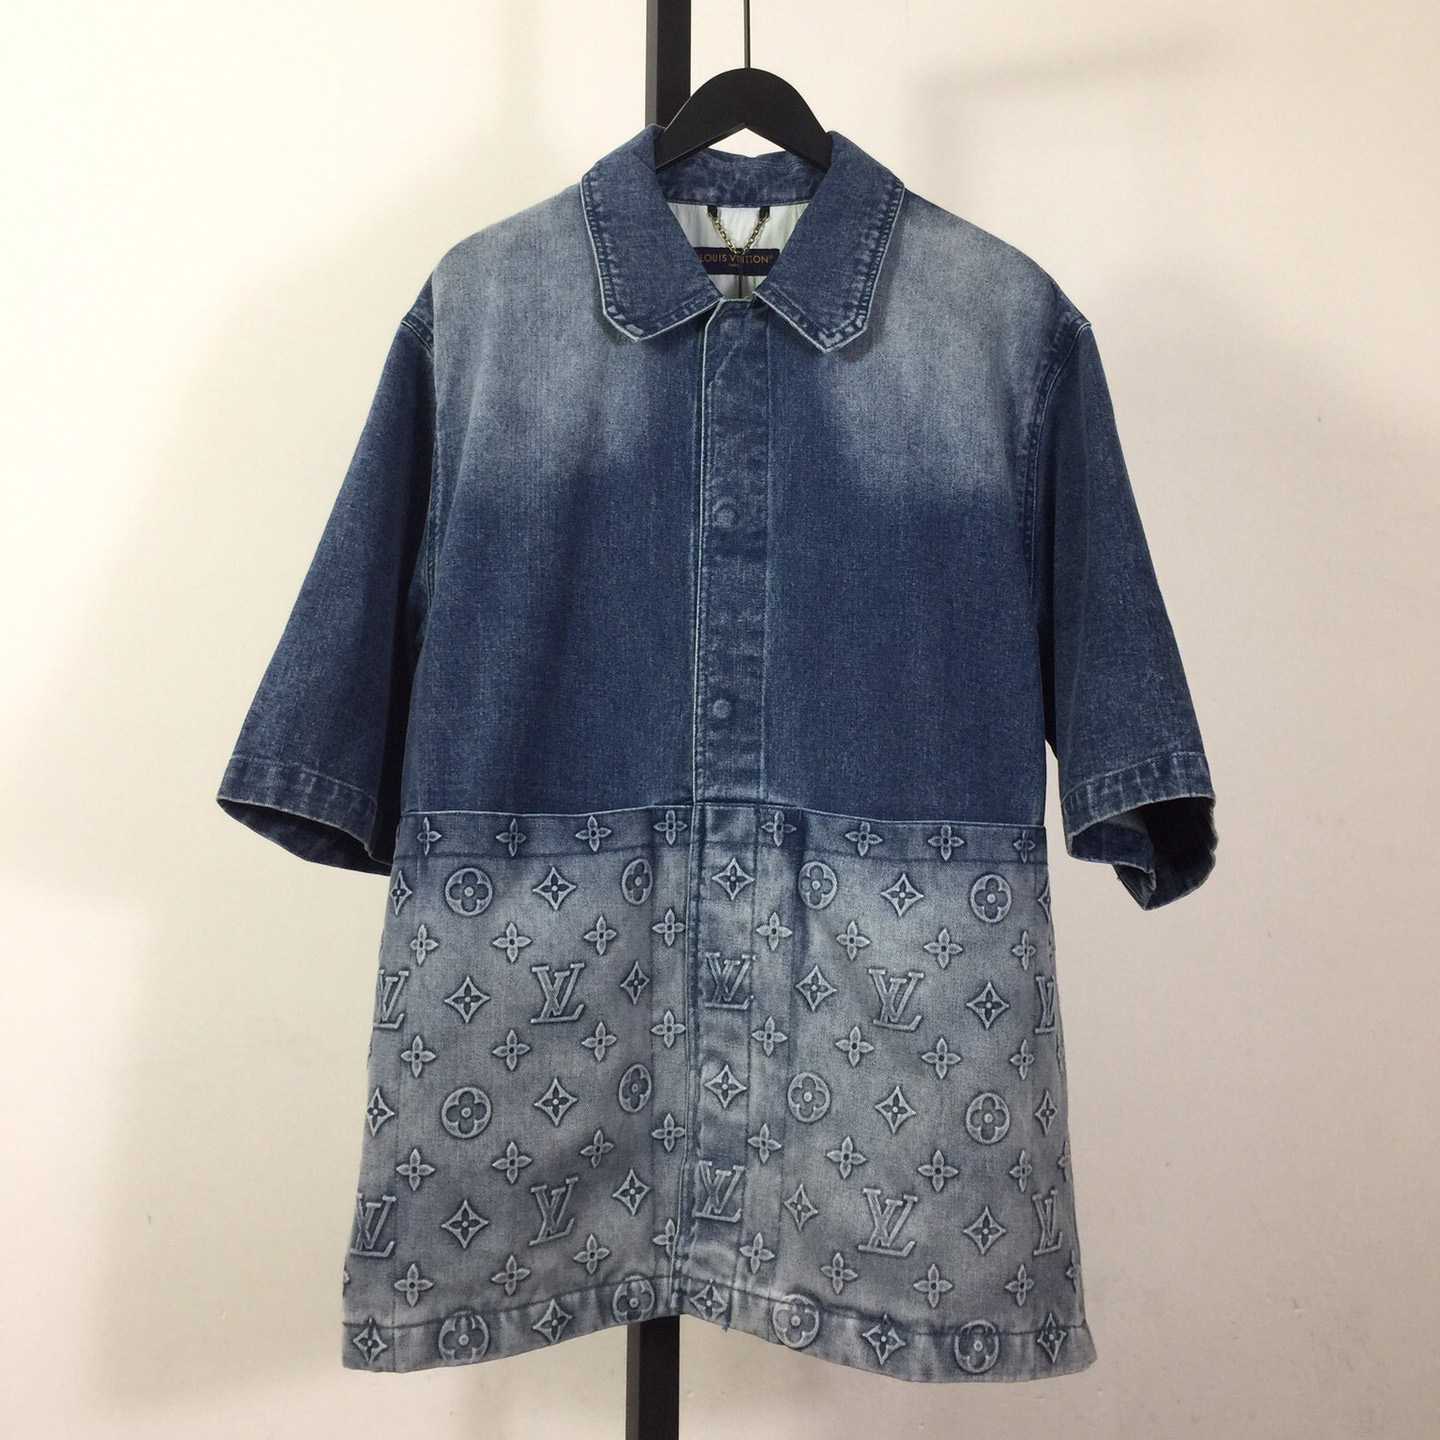 Louis Vuitton Short-sleeved Denim Workwear Shirt 1ABLDH, Blue, Please Contact Seller for Other Sizes